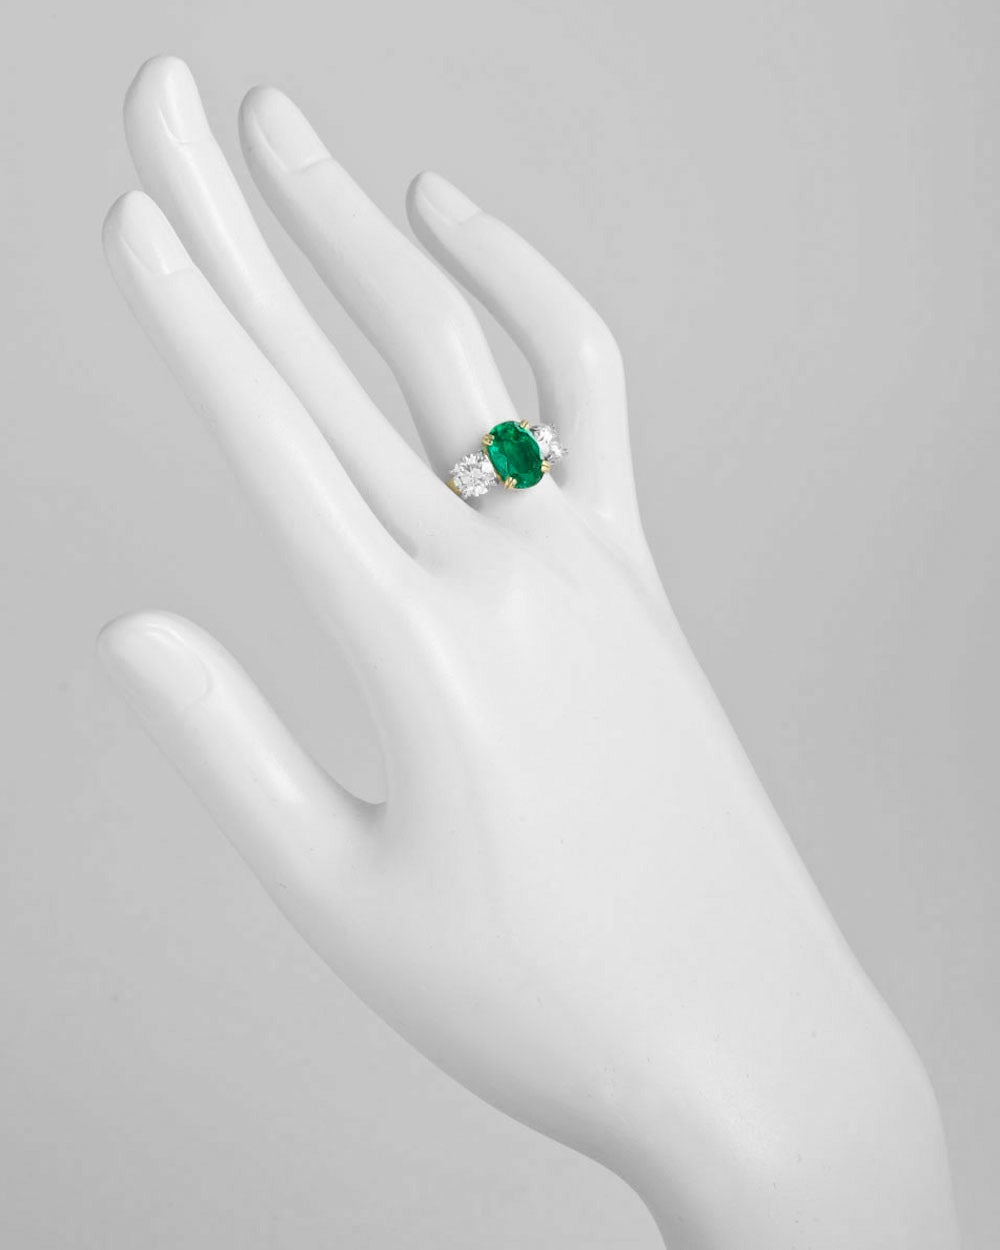 Colombian emerald and diamond three-stone ring, centering on an oval brilliant-cut emerald weighing 2.07 carats, flanked by two round brilliant cut diamond shoulders weighing 1.59 total carats (both G-color/SI2 clarity), mounted in 18k yellow gold